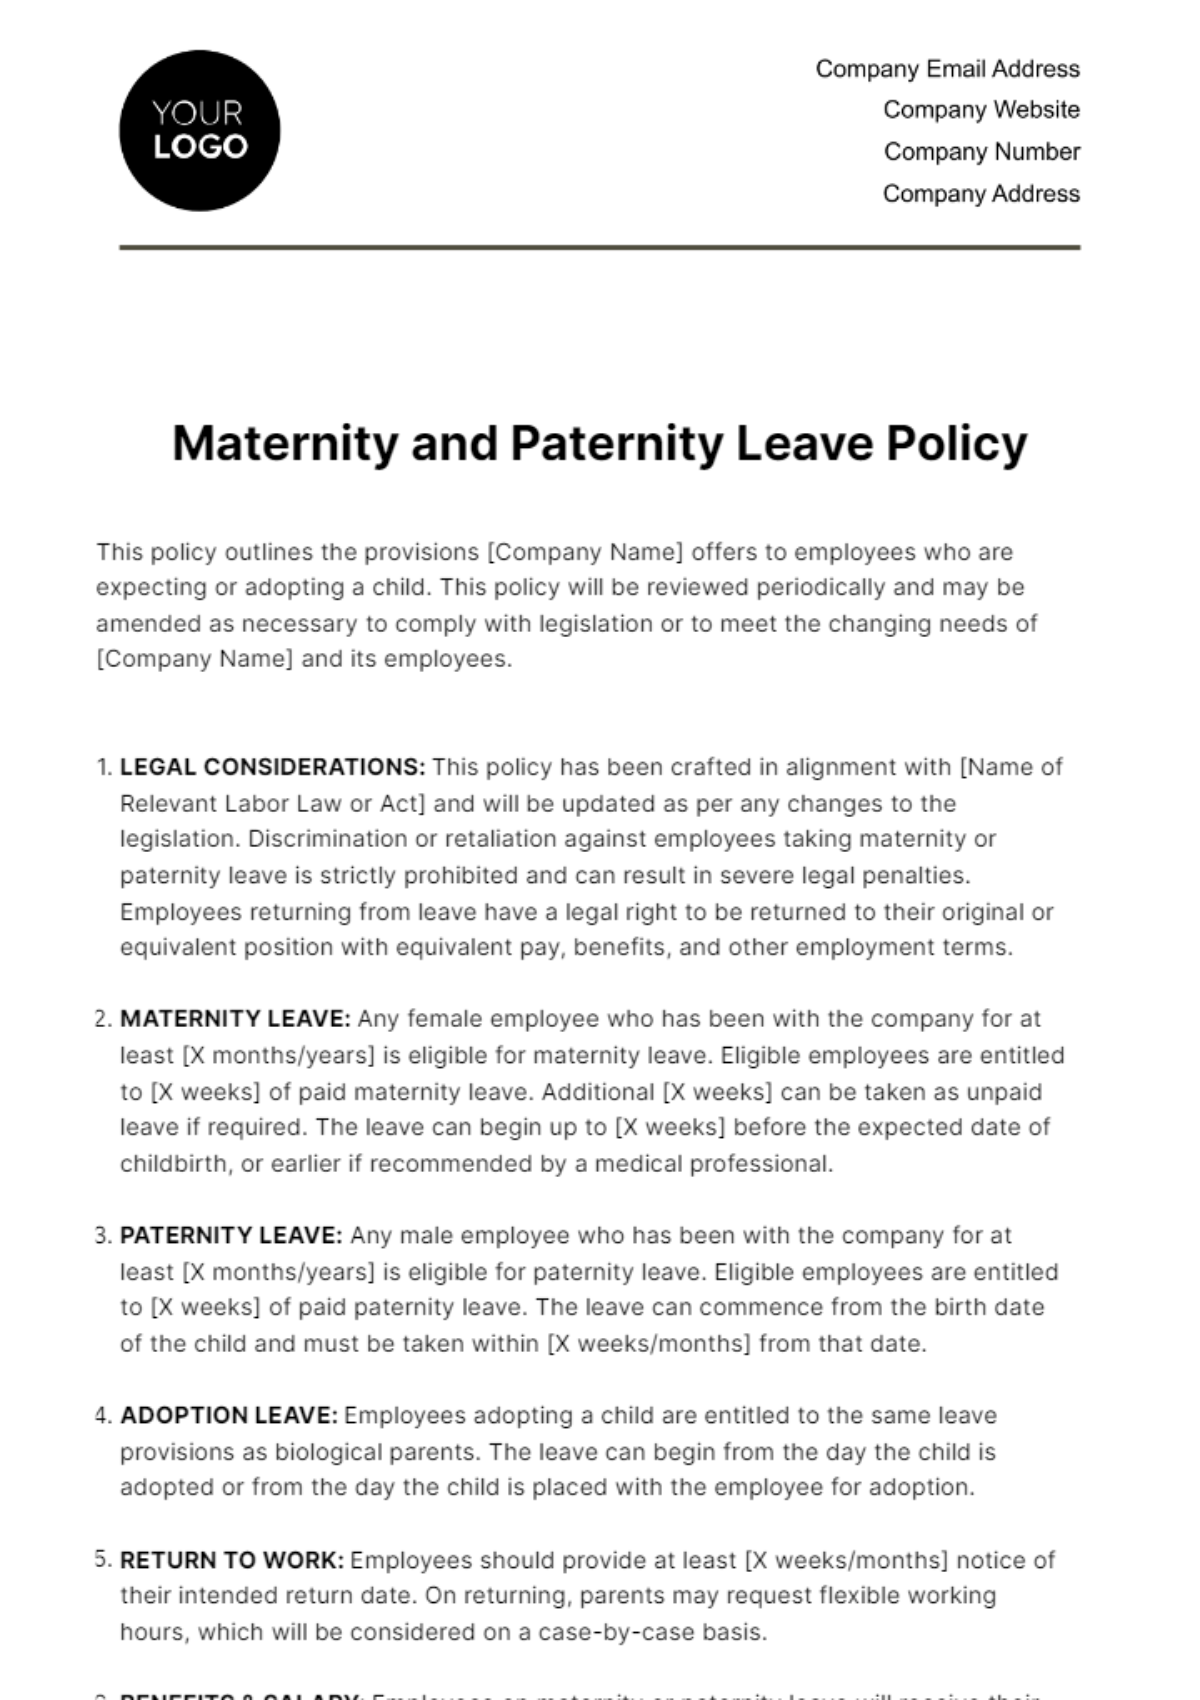 Maternity and Paternity Leave Policy HR Template